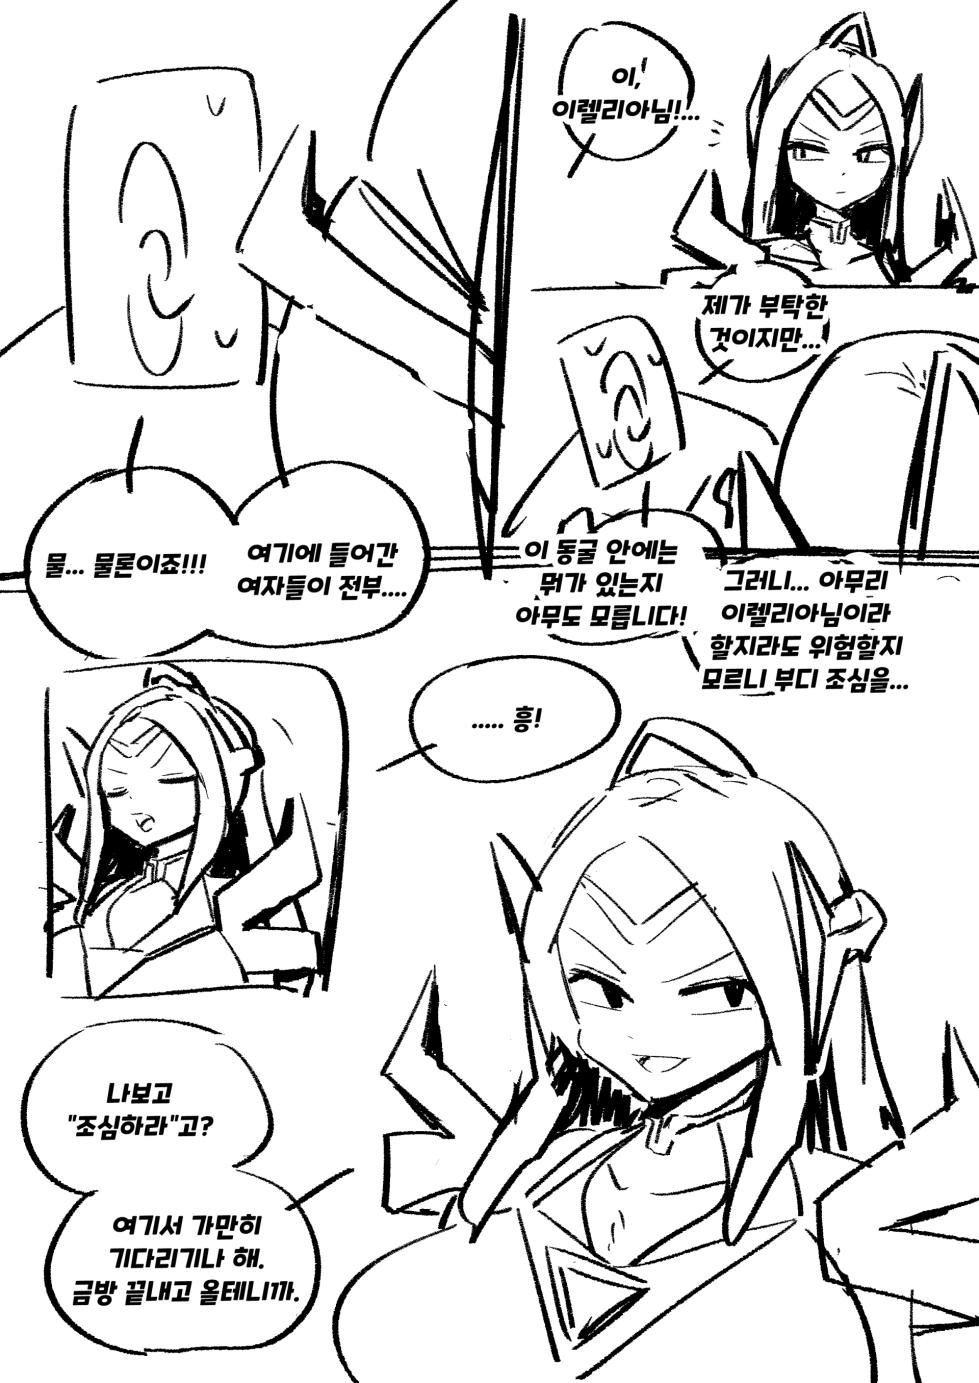 [Woomochichi] Irelia Personality Excretion (League of Legends) - Page 5